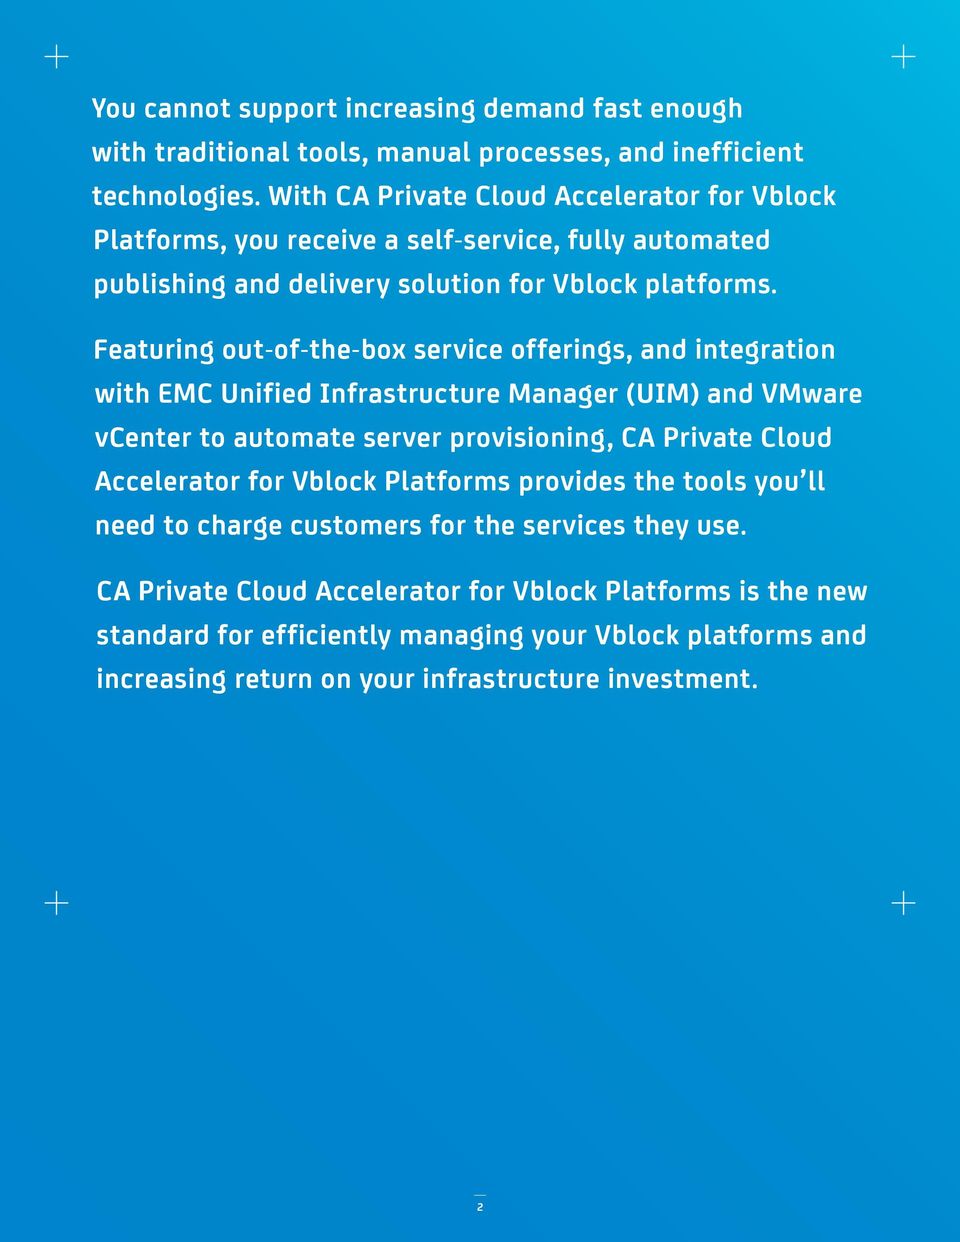 Featuring out-of-the-box service offerings, and integration with EMC Unified Infrastructure Manager (UIM) and VMware vcenter to automate server provisioning, CA Private Cloud